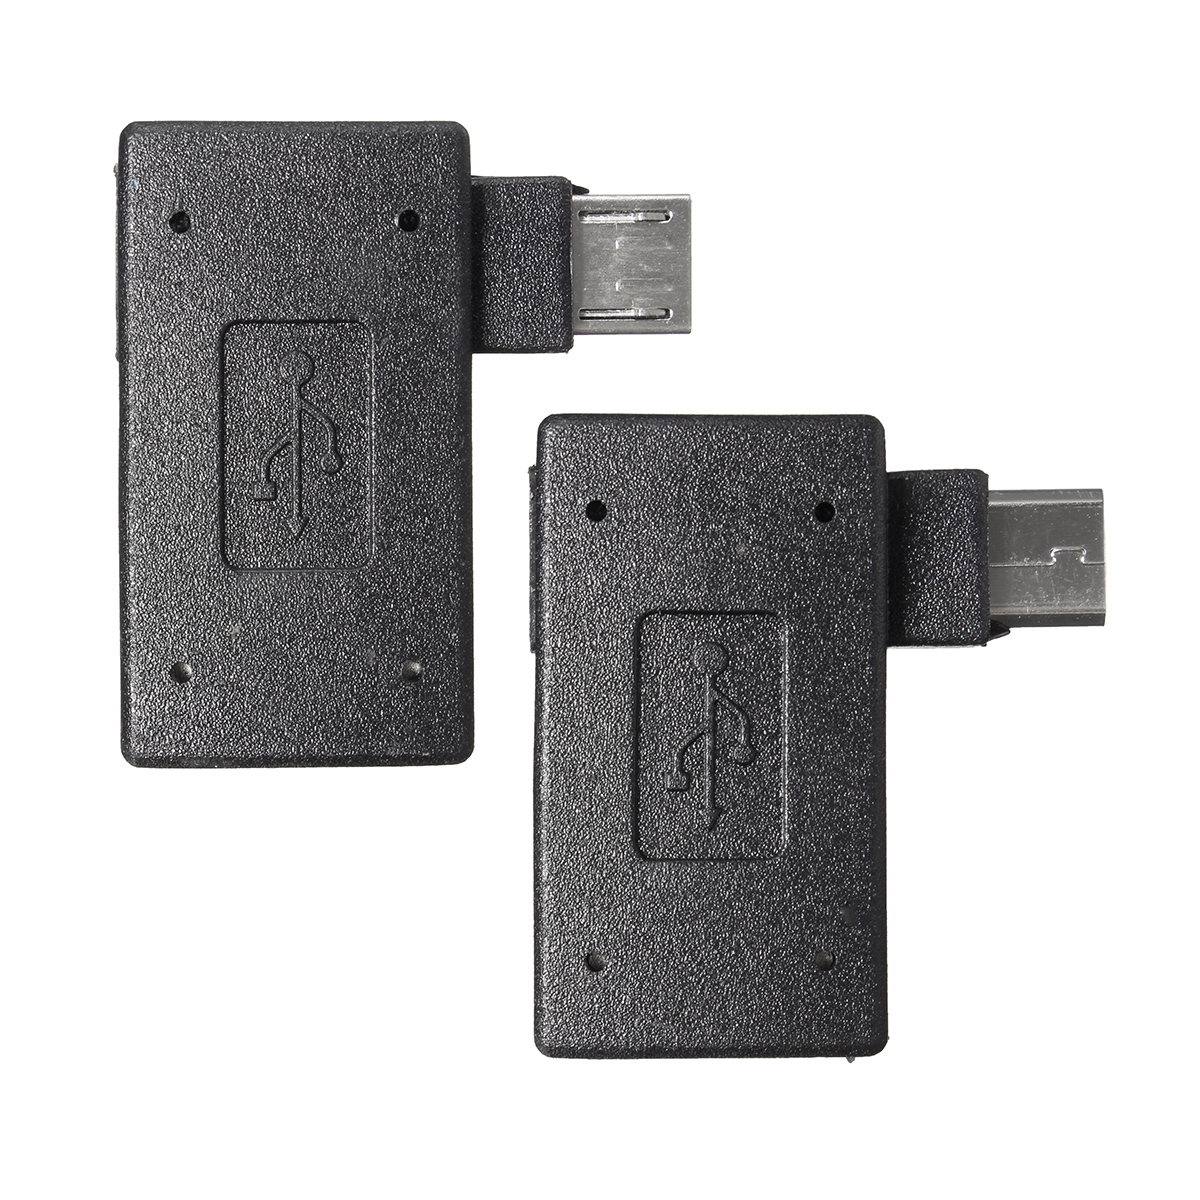 Bakeey-90-Degree-Micro-USB-OTG-Adapter-Male-to-USB-20-Converter-for-Xiaomi-Huawei-Android-1301497